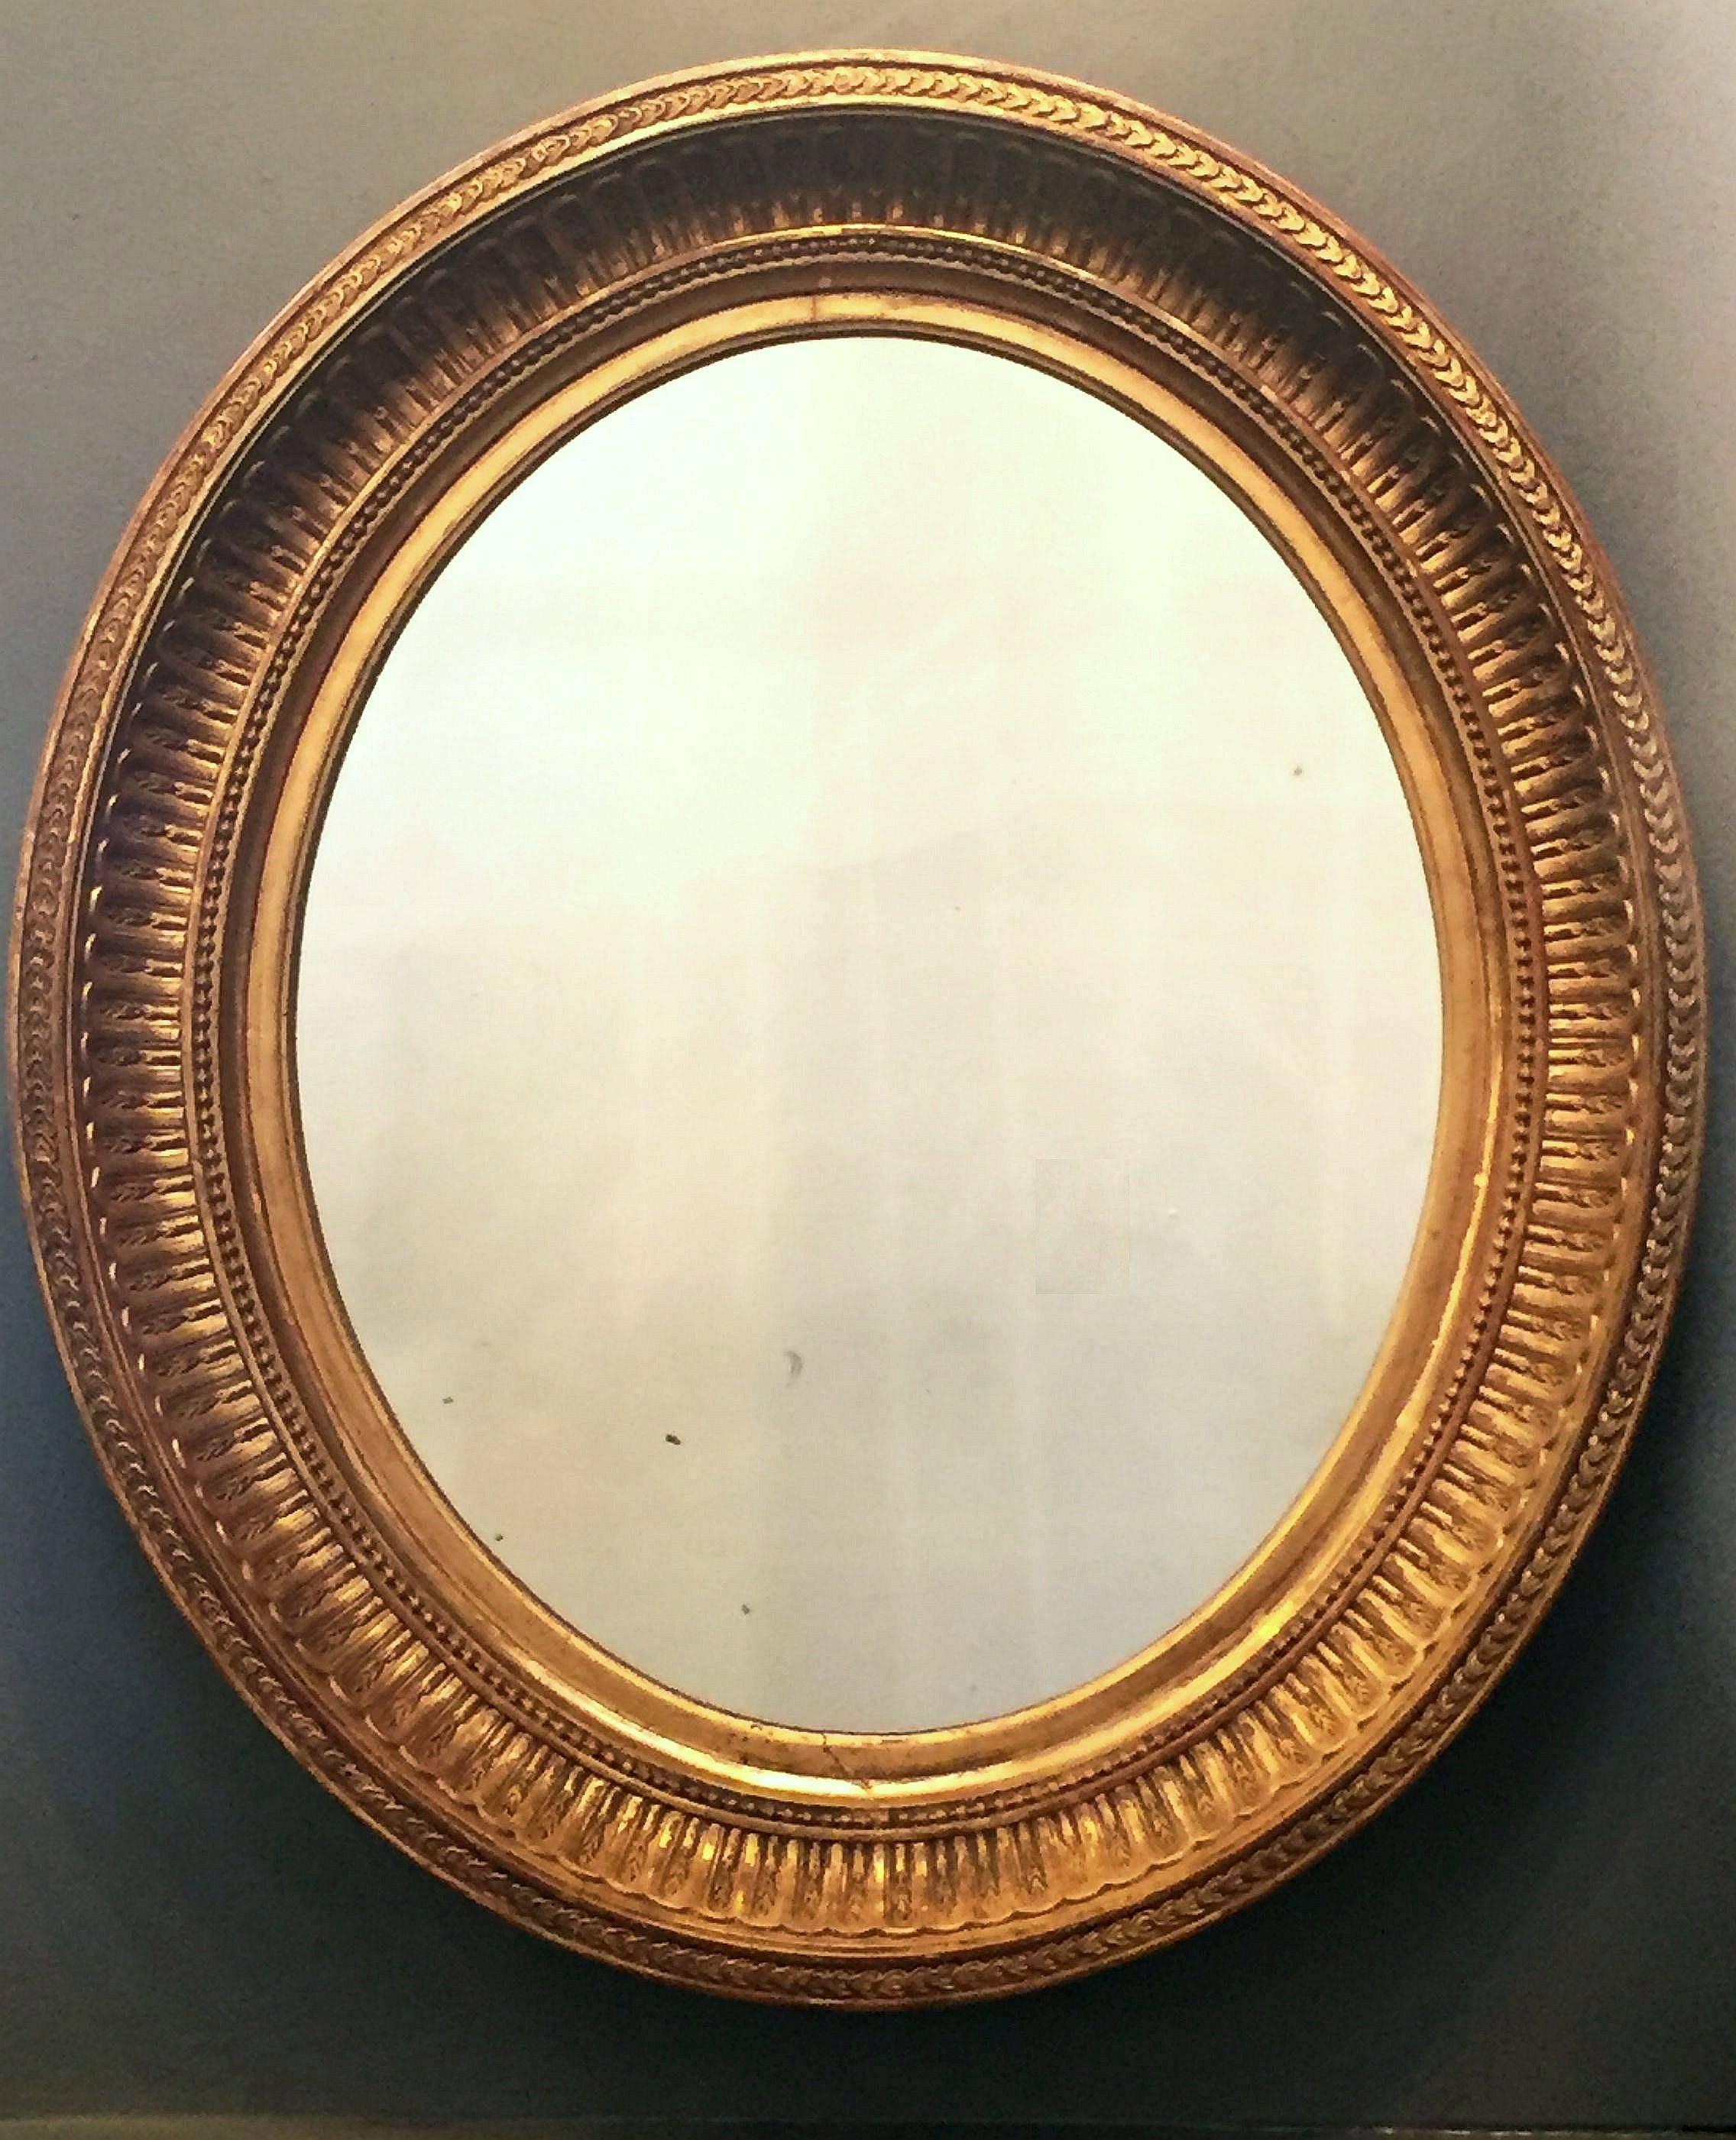 A fine English gilt fame oval mirror in the Classical style, featuring a gilded relief design around the circumference.

Dimensions - 23 3/4